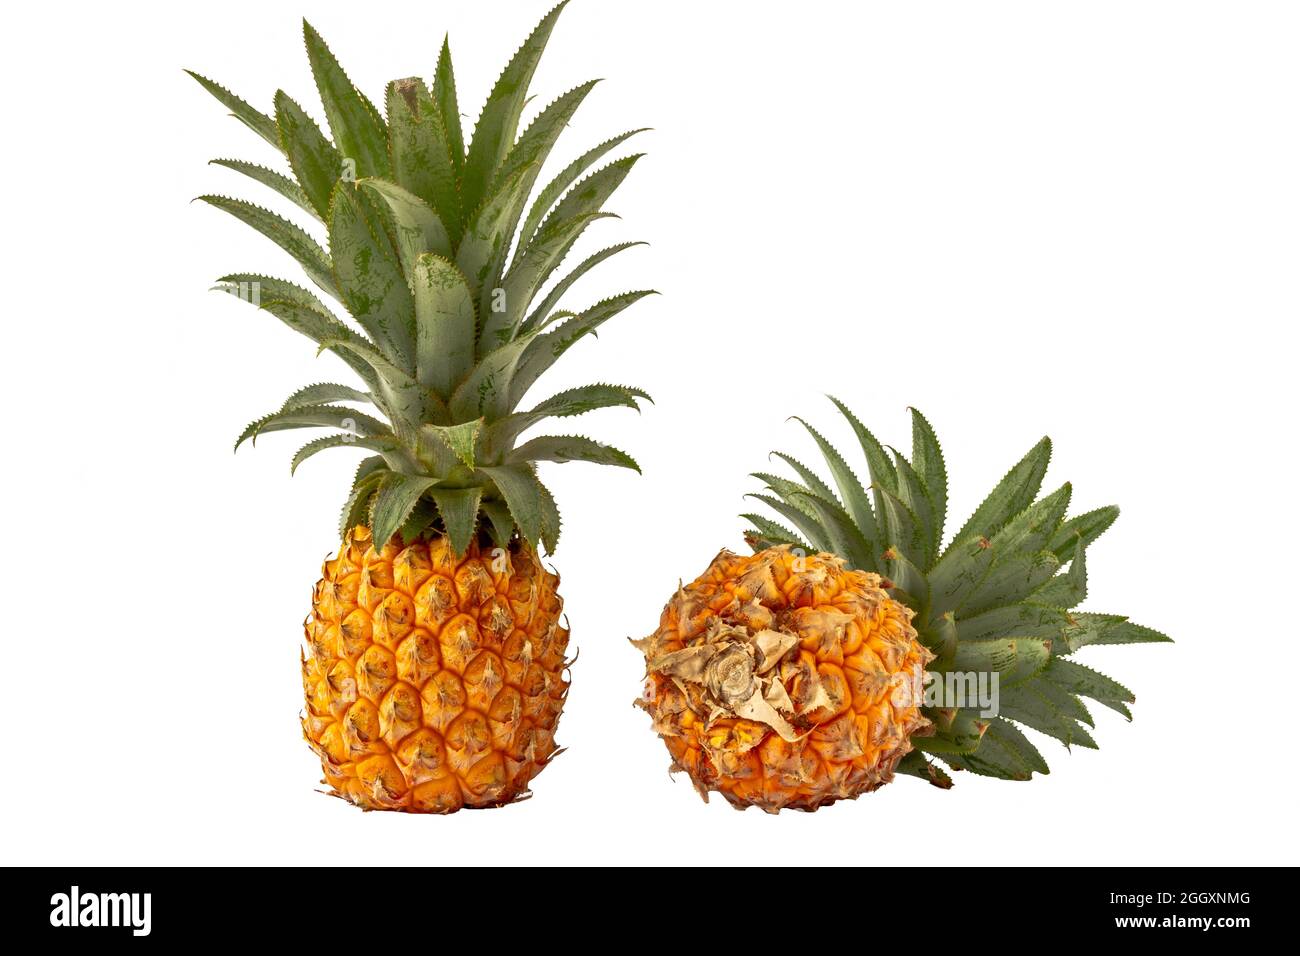 isolated pineapple fruit in white background with clipping path, two yellow-orange pineapples are ready to be consumed Stock Photo